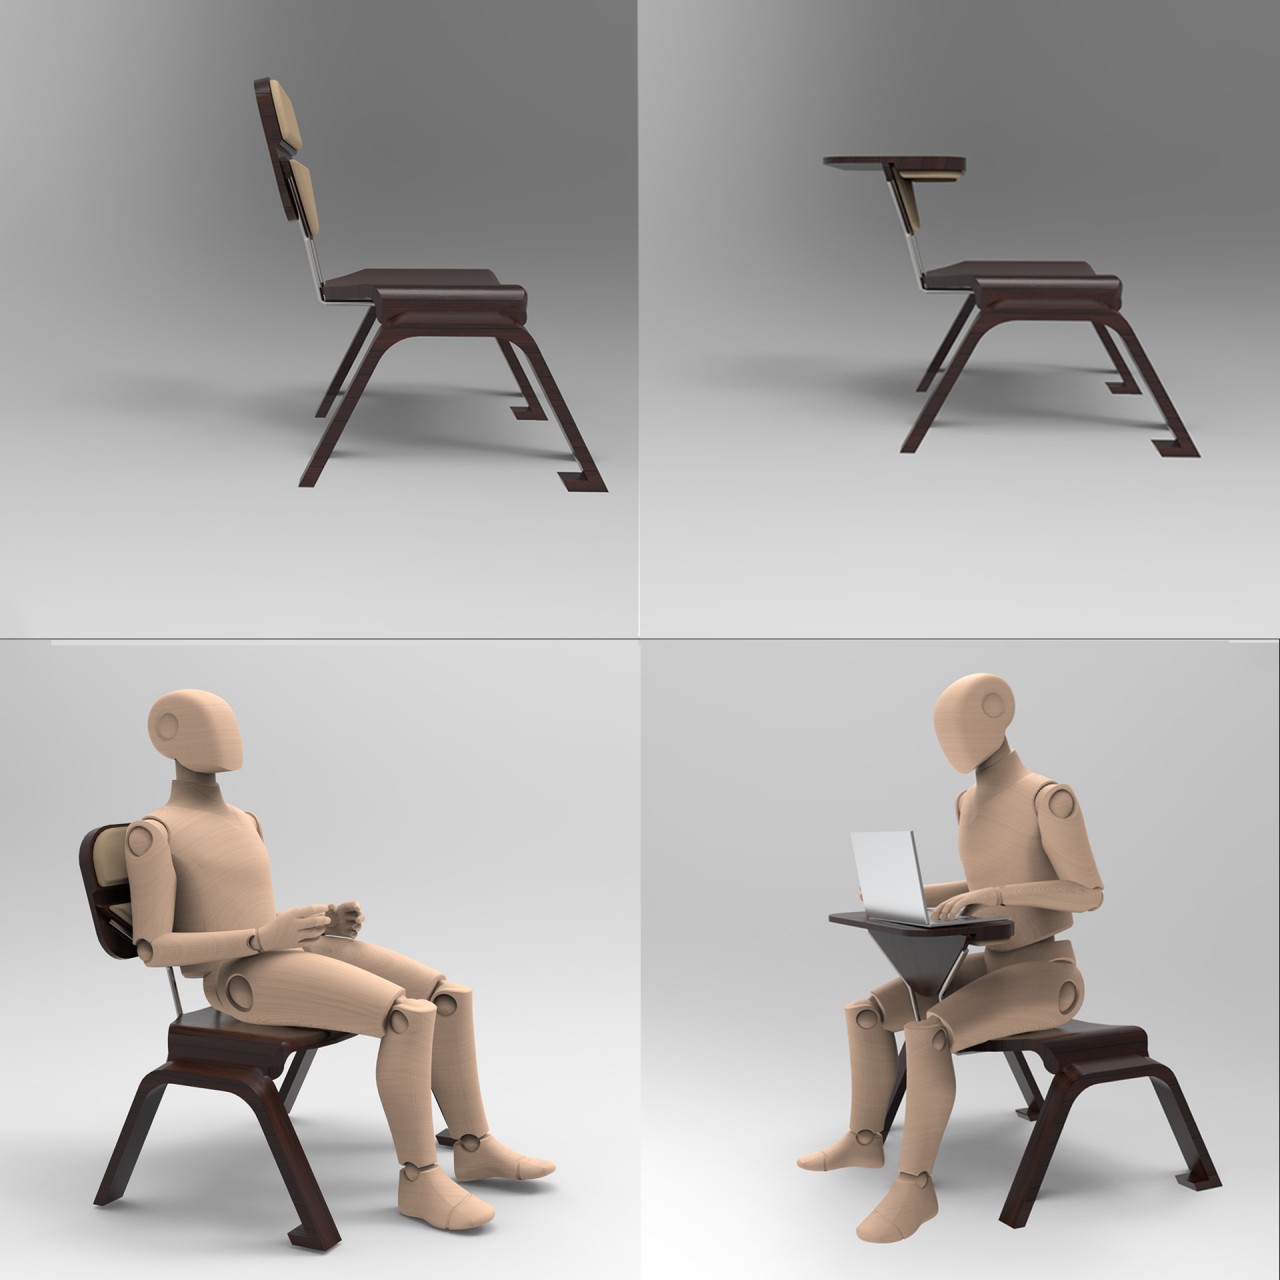 Stackable chair concept transforms into a desk for space-saving efficiency